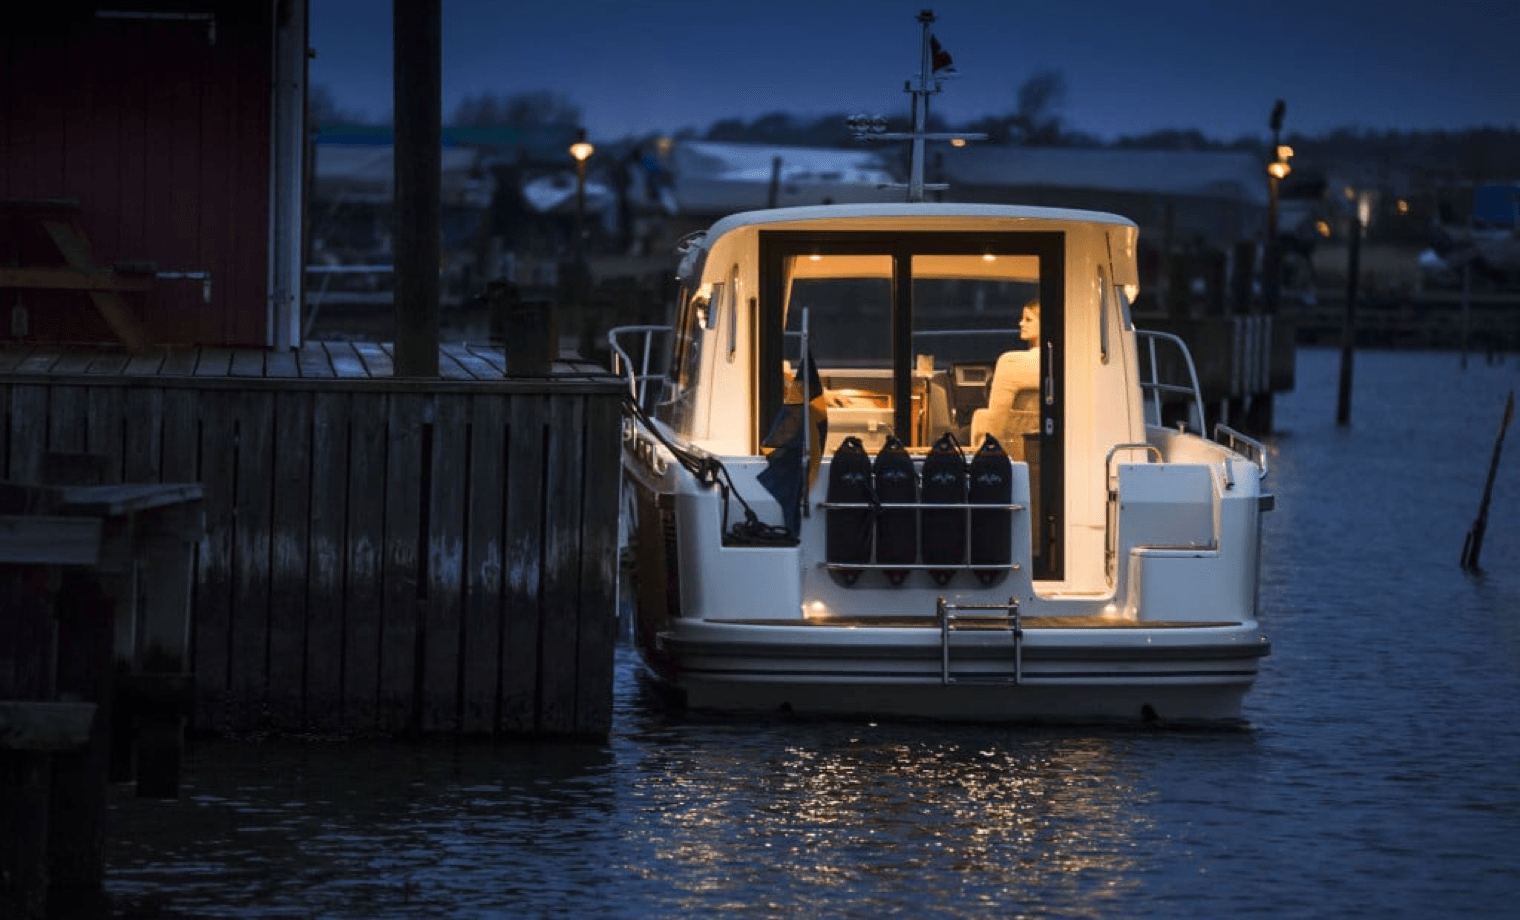 The back of a boat in the harbour at night